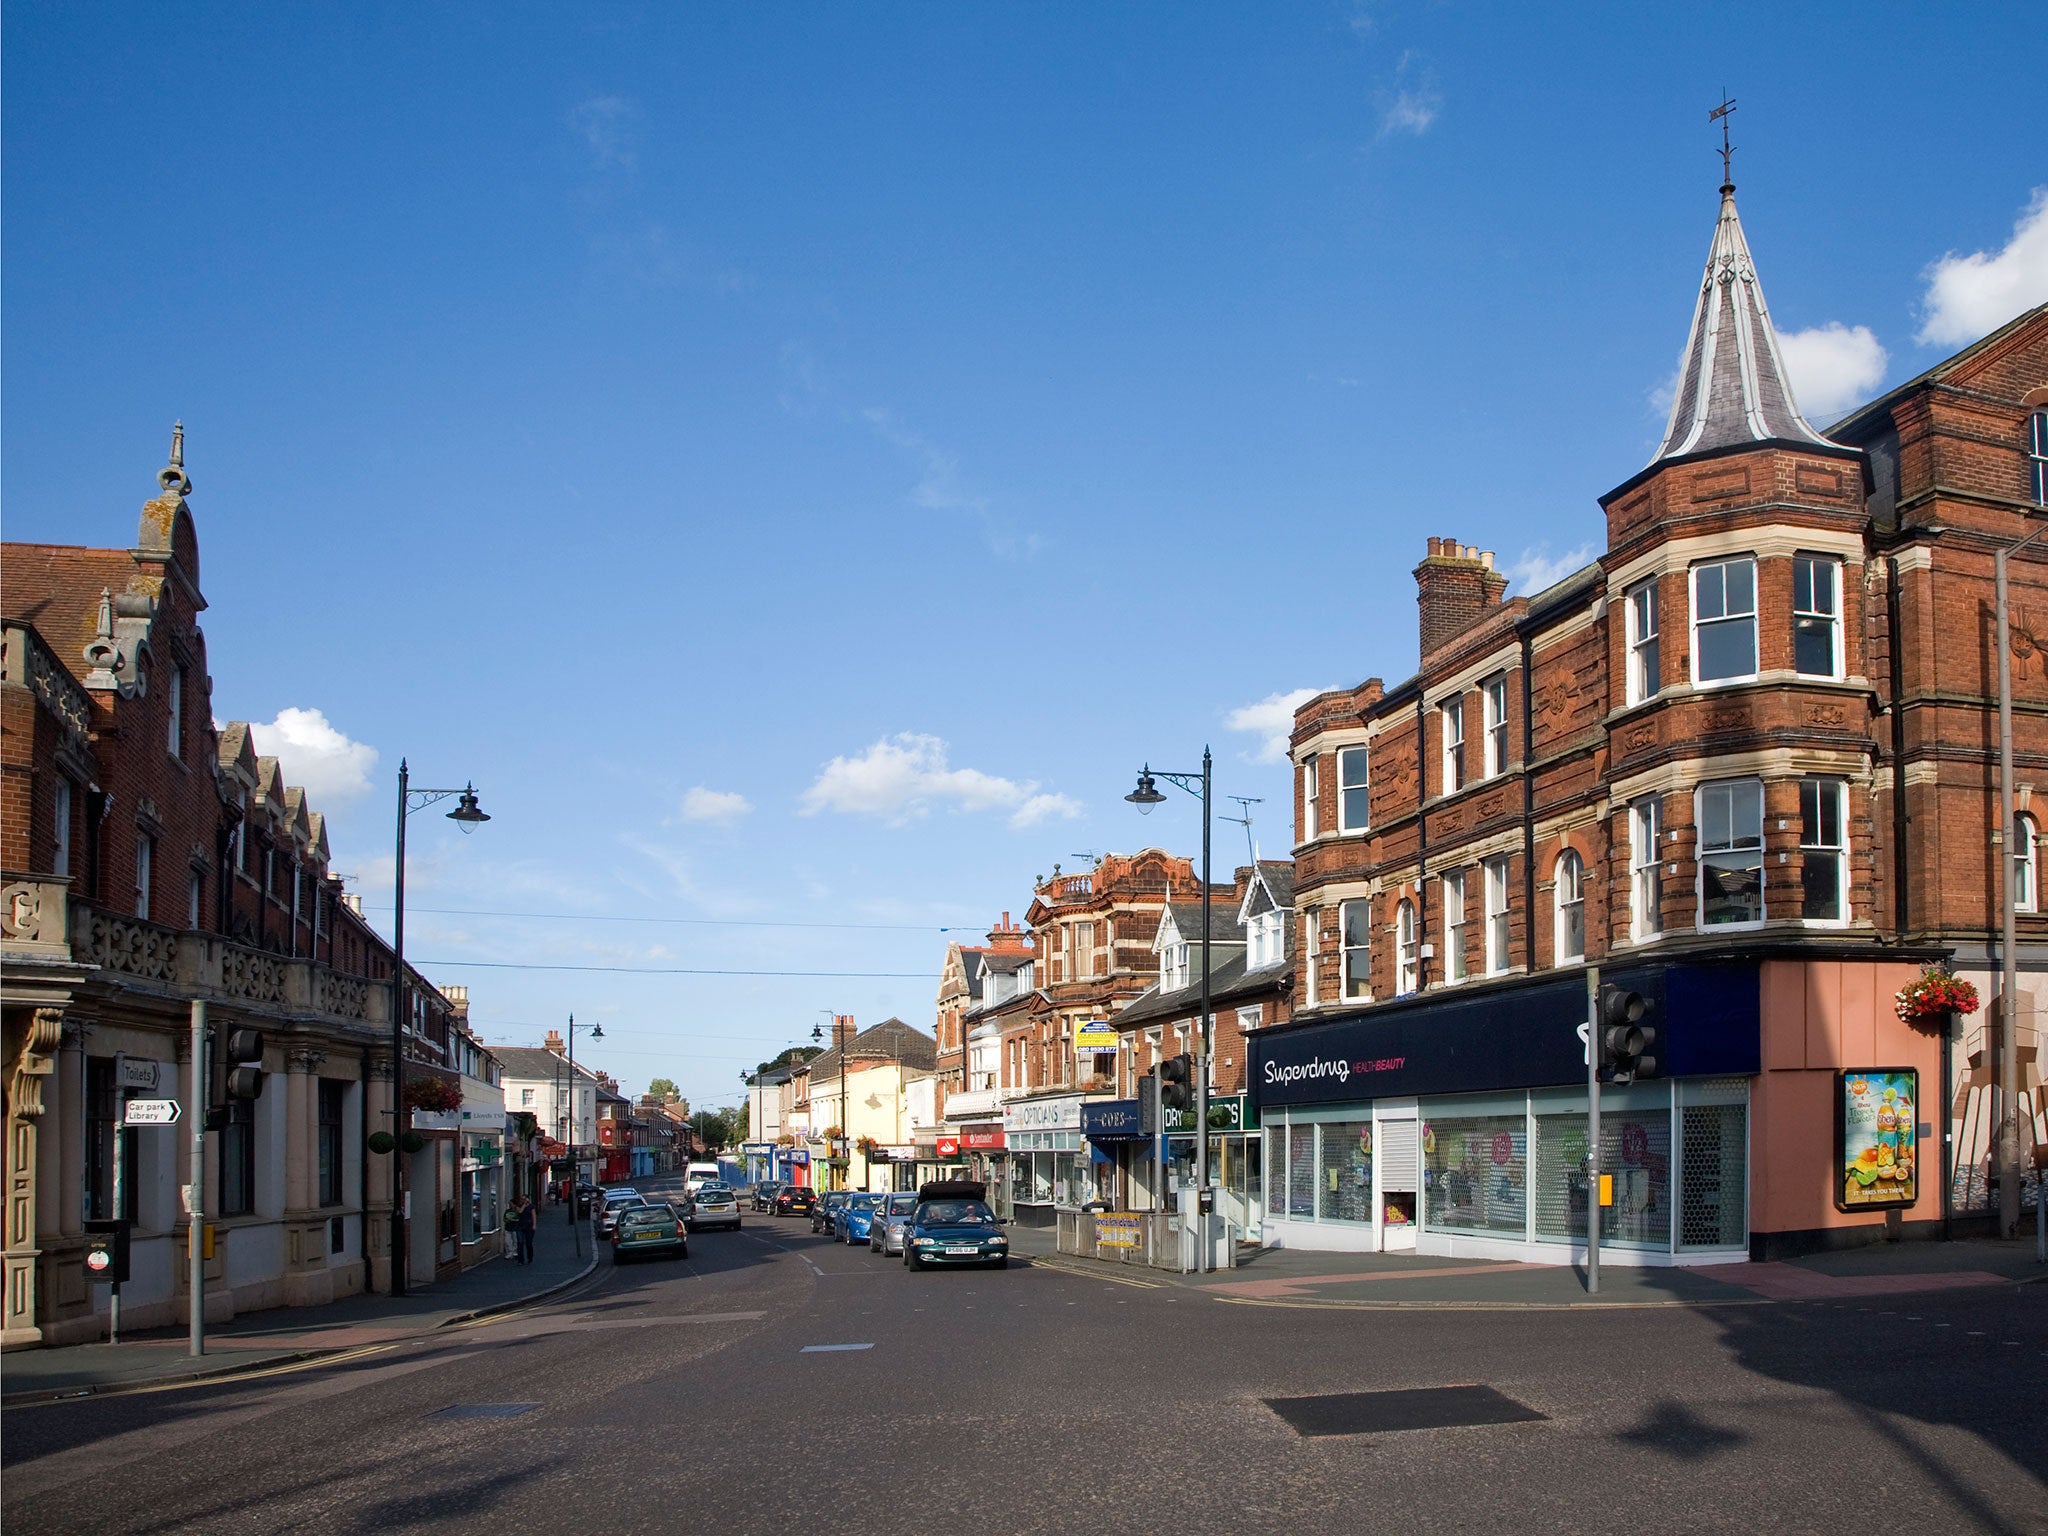 High Street shops in the town center of Dovercourt, Harwich, Essex, England.